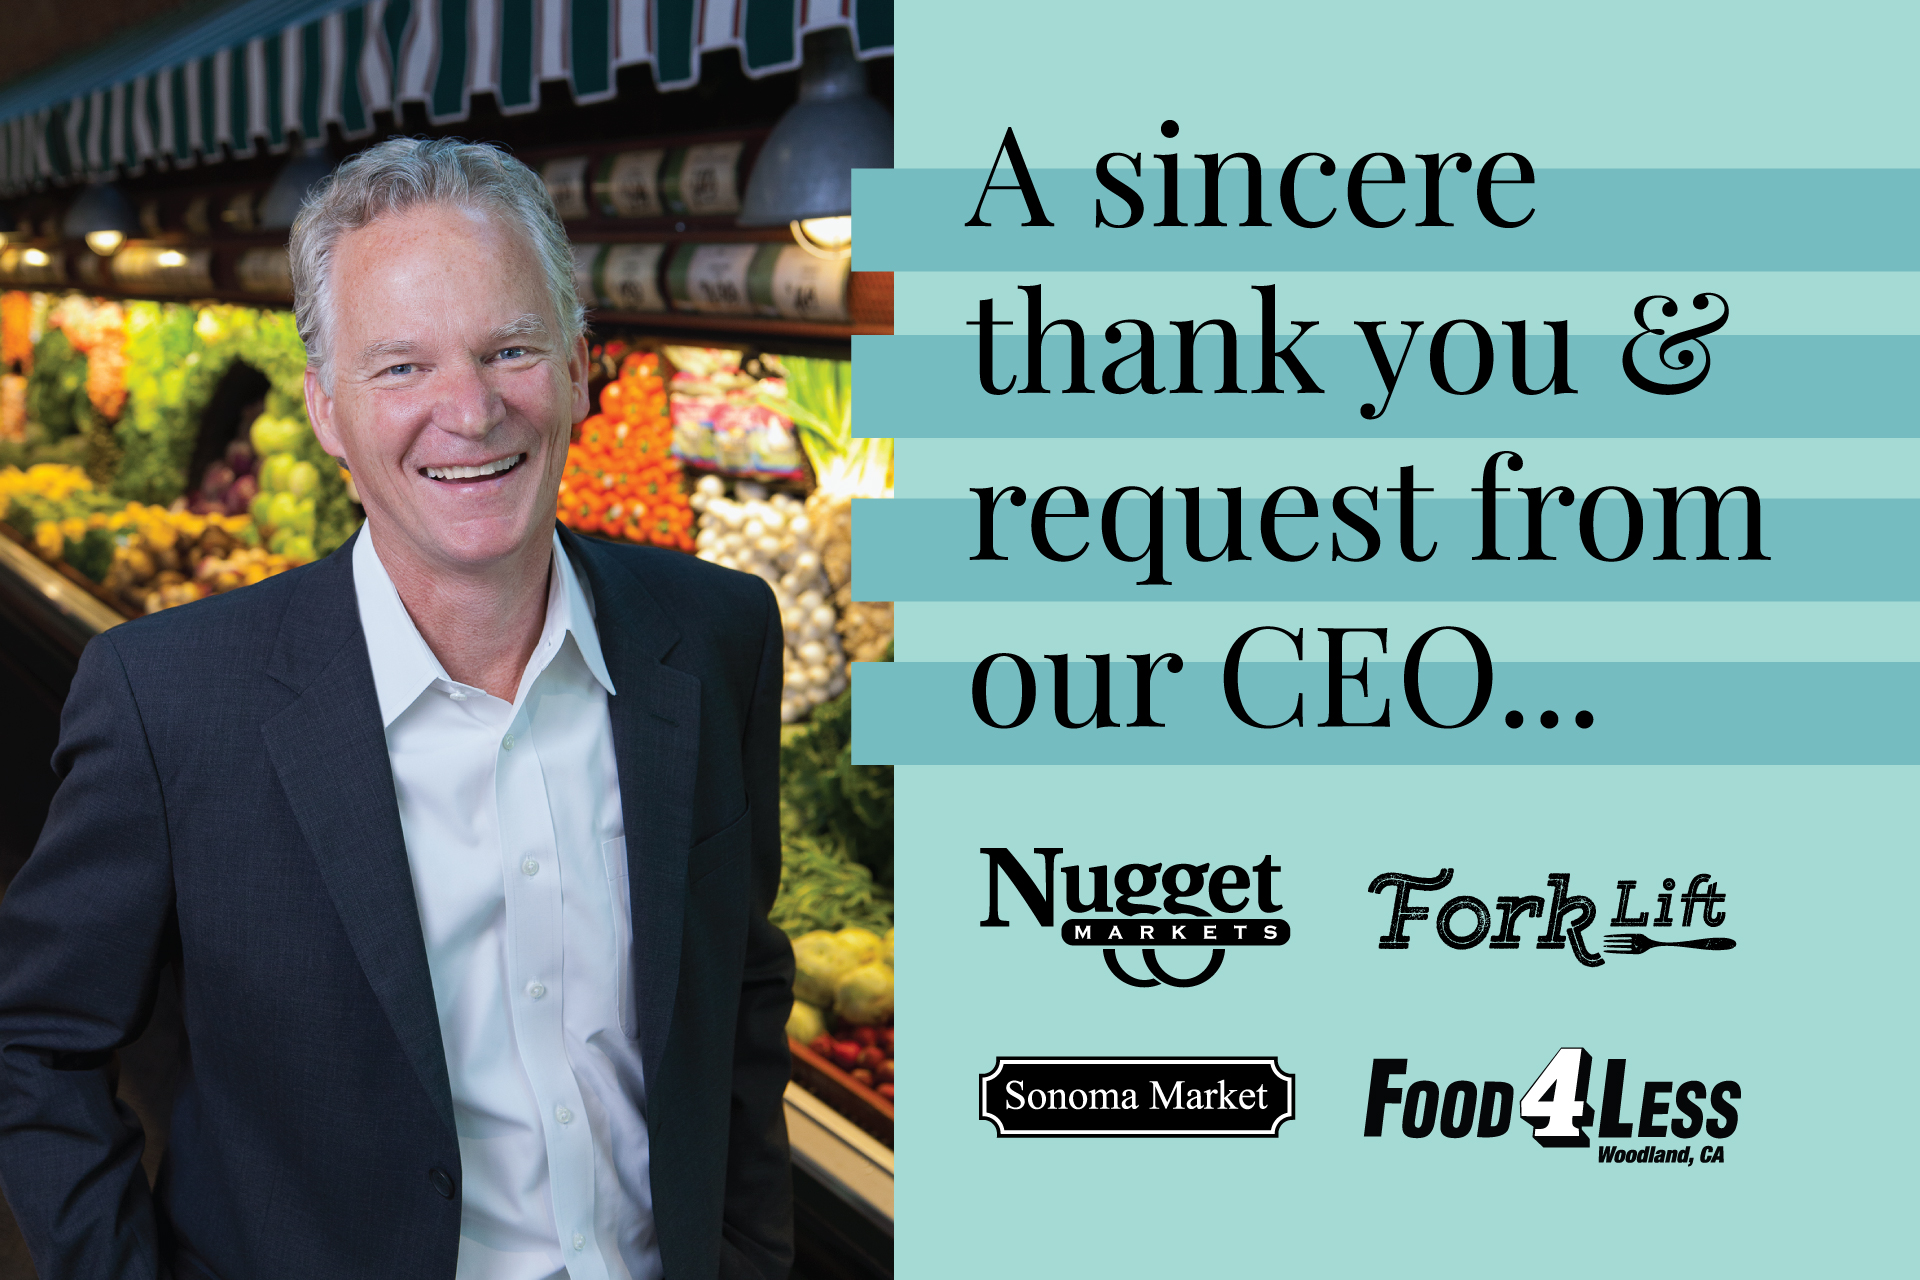 photo of Eric Stille with text saying a sincere thank you and request from our CEO